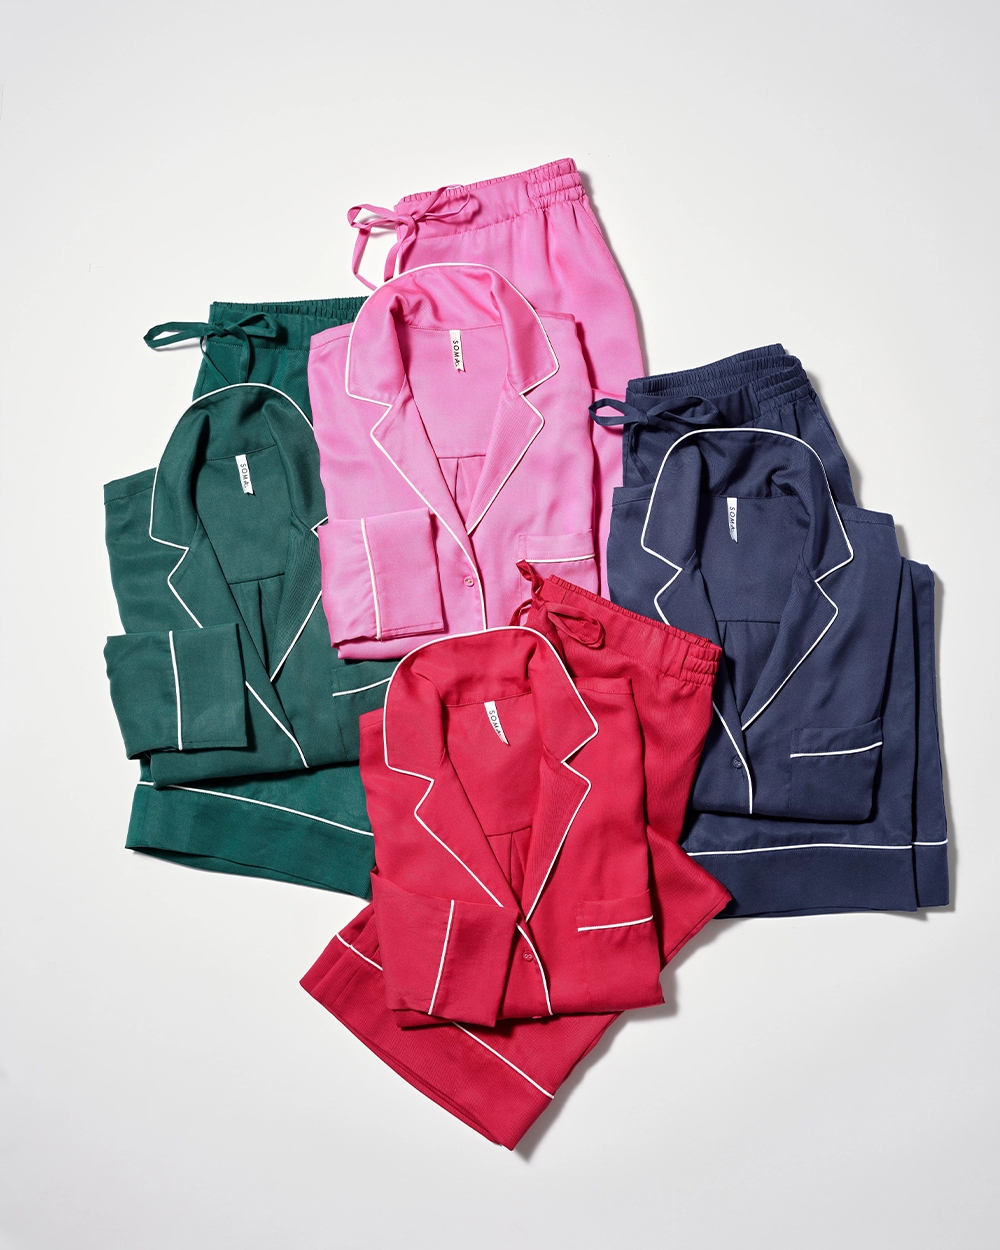 Soma<sup class=st-superscript>®</sup> laydown of matching pajama sets in dark green, pink, red, and navy.